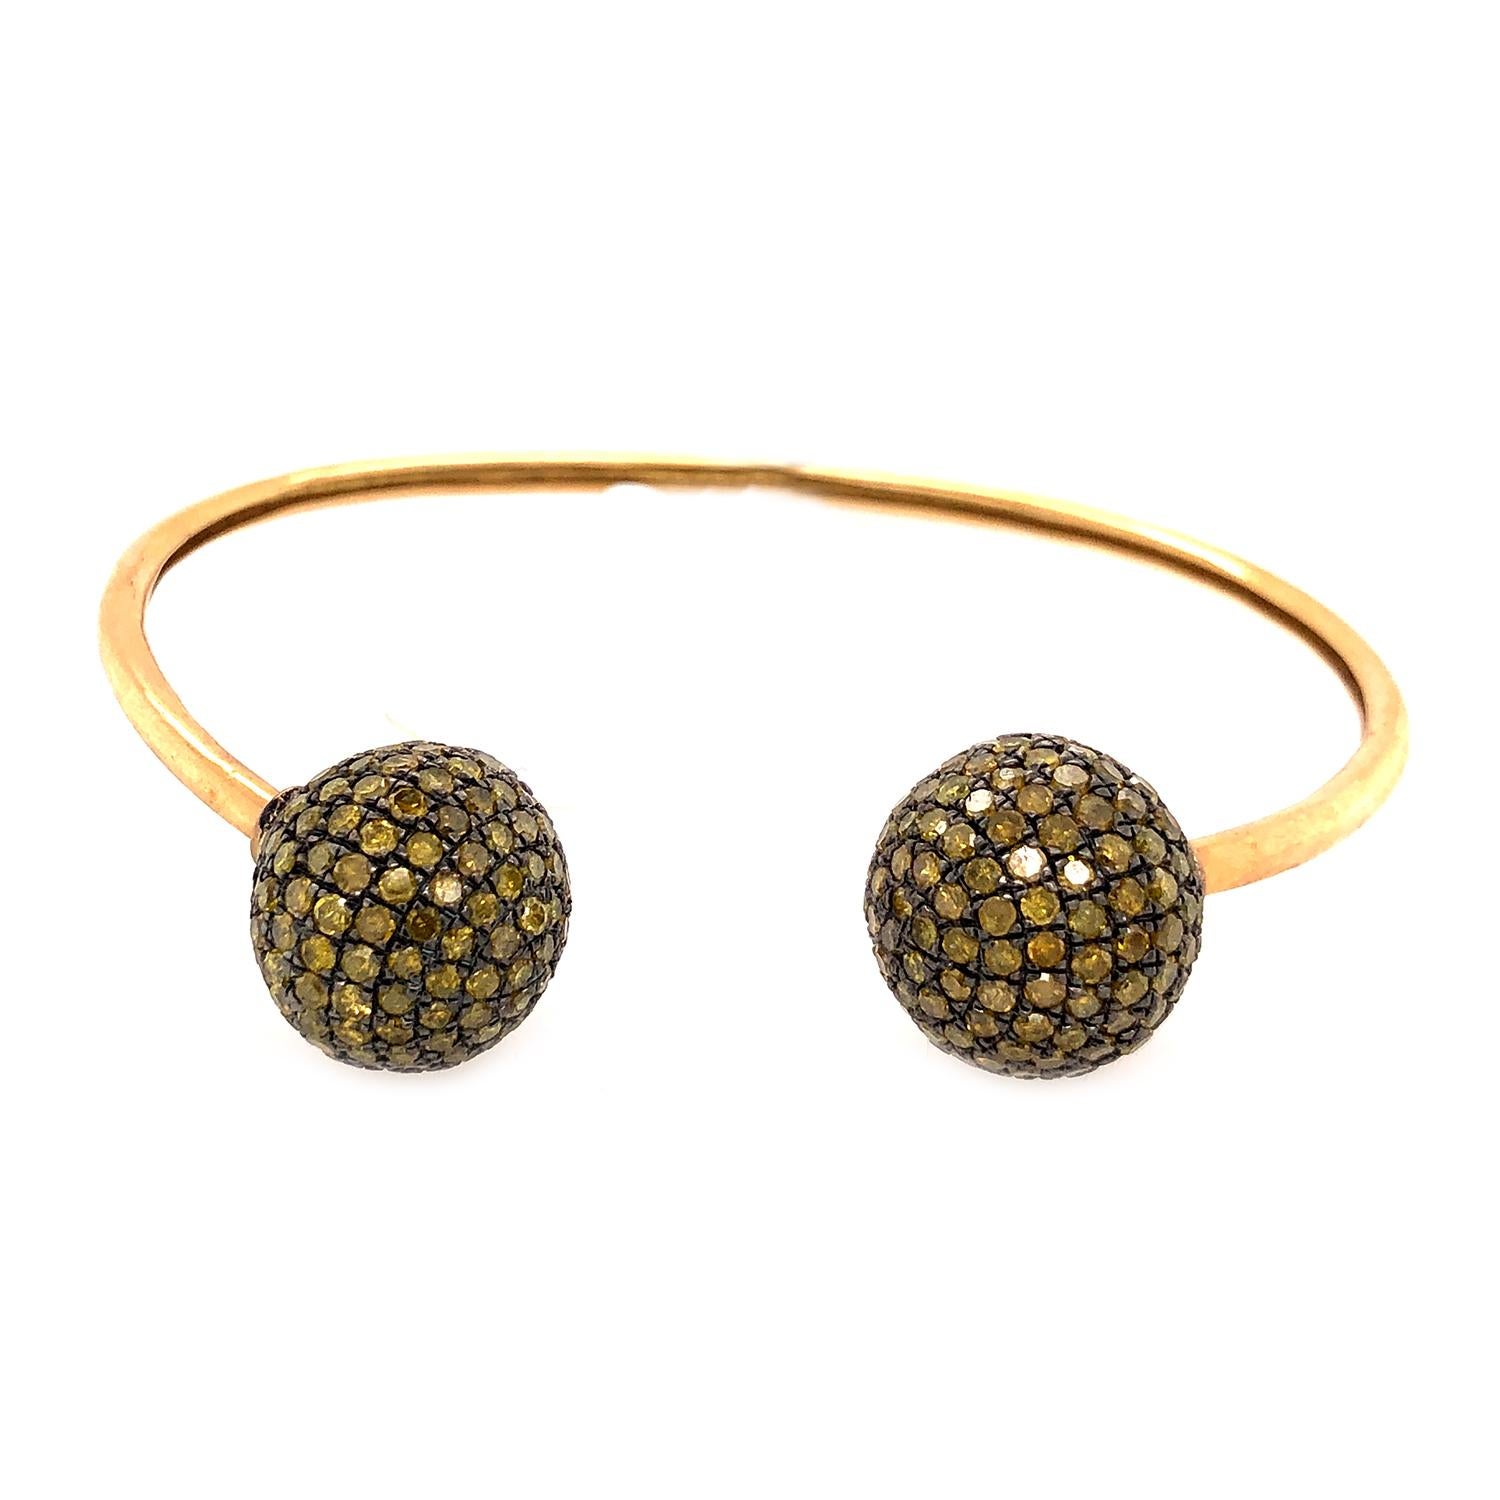 gold bangle with balls on end